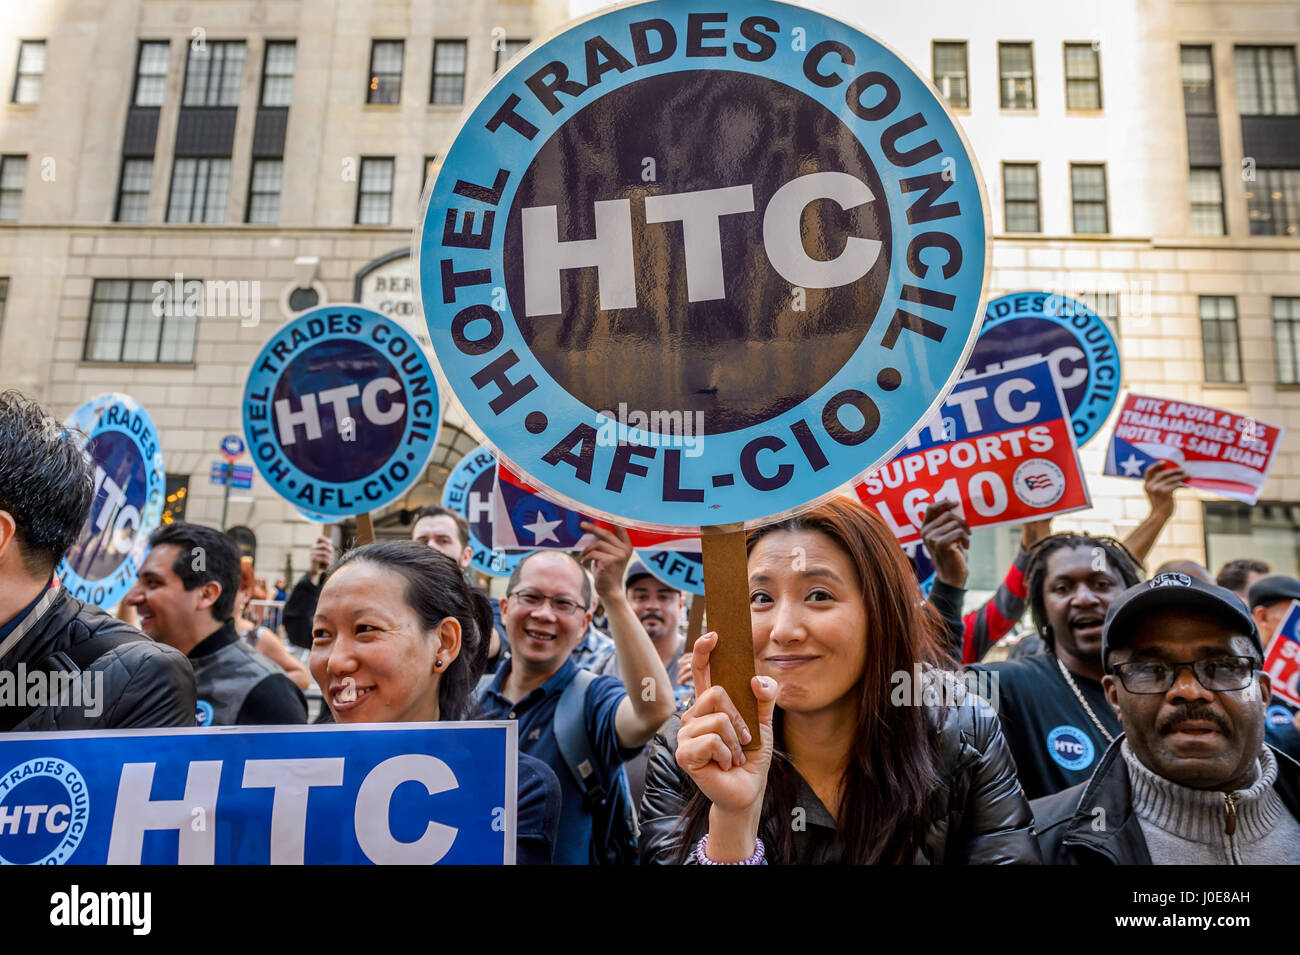 New York, New York, USA. 11th Apr, 2017. Workers from the New York Hotel & Motel Trades Council organized a protest on April 11th, 2017; against Fundamental Financial Advisors, an owner of the El San Juan Hotel, for the mistreatment and exploitation of hotel workers in Puerto Rico. On Monday, Fundamental Financial Advisors, an American hedge fund playing a role on the Puerto Rican debt crisis, started replacing long-time female employees with younger women - and refusing to negotiate a fair labor contract. Credit: PACIFIC PRESS/Alamy Live News Stock Photo